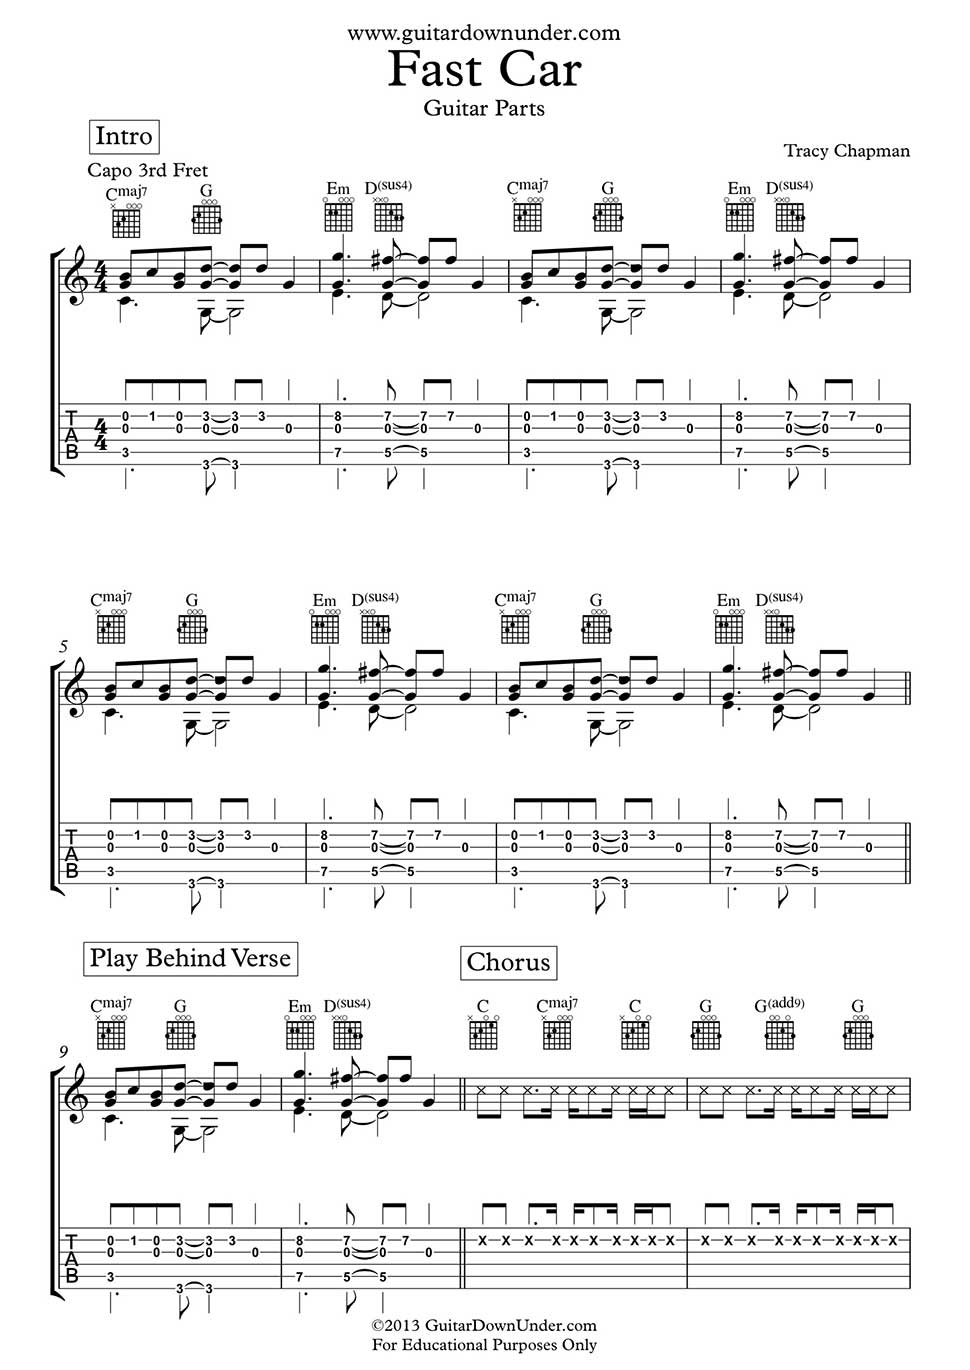 Fast Car Chords Fast Car Guitar Chords And Tab Tracy Chapman Arranged For